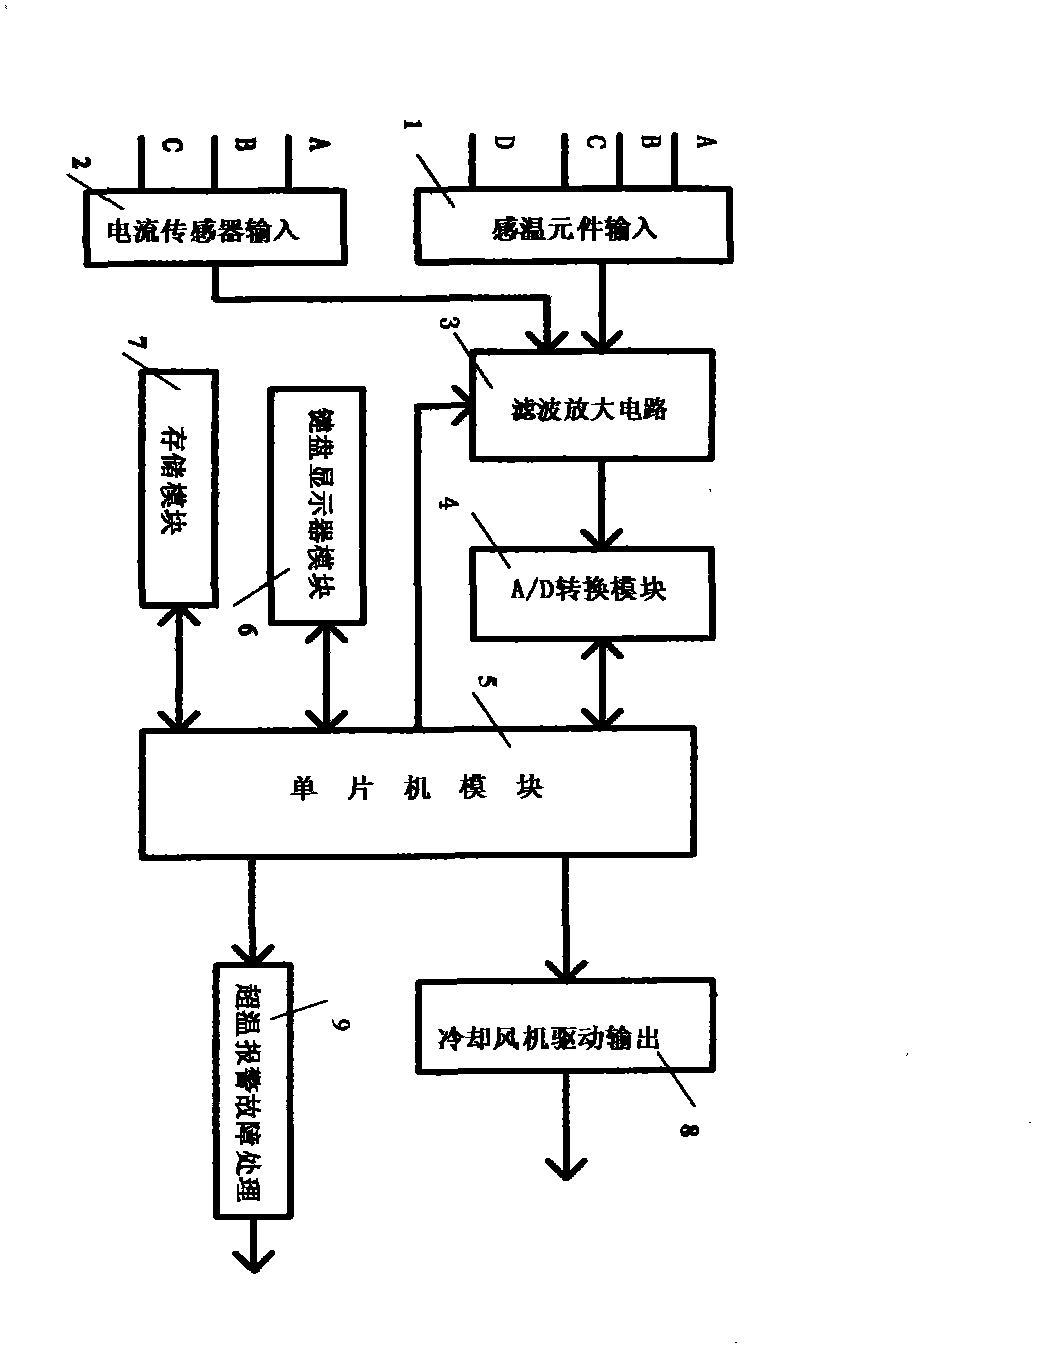 Temperature display controlling device for dry-type transformer